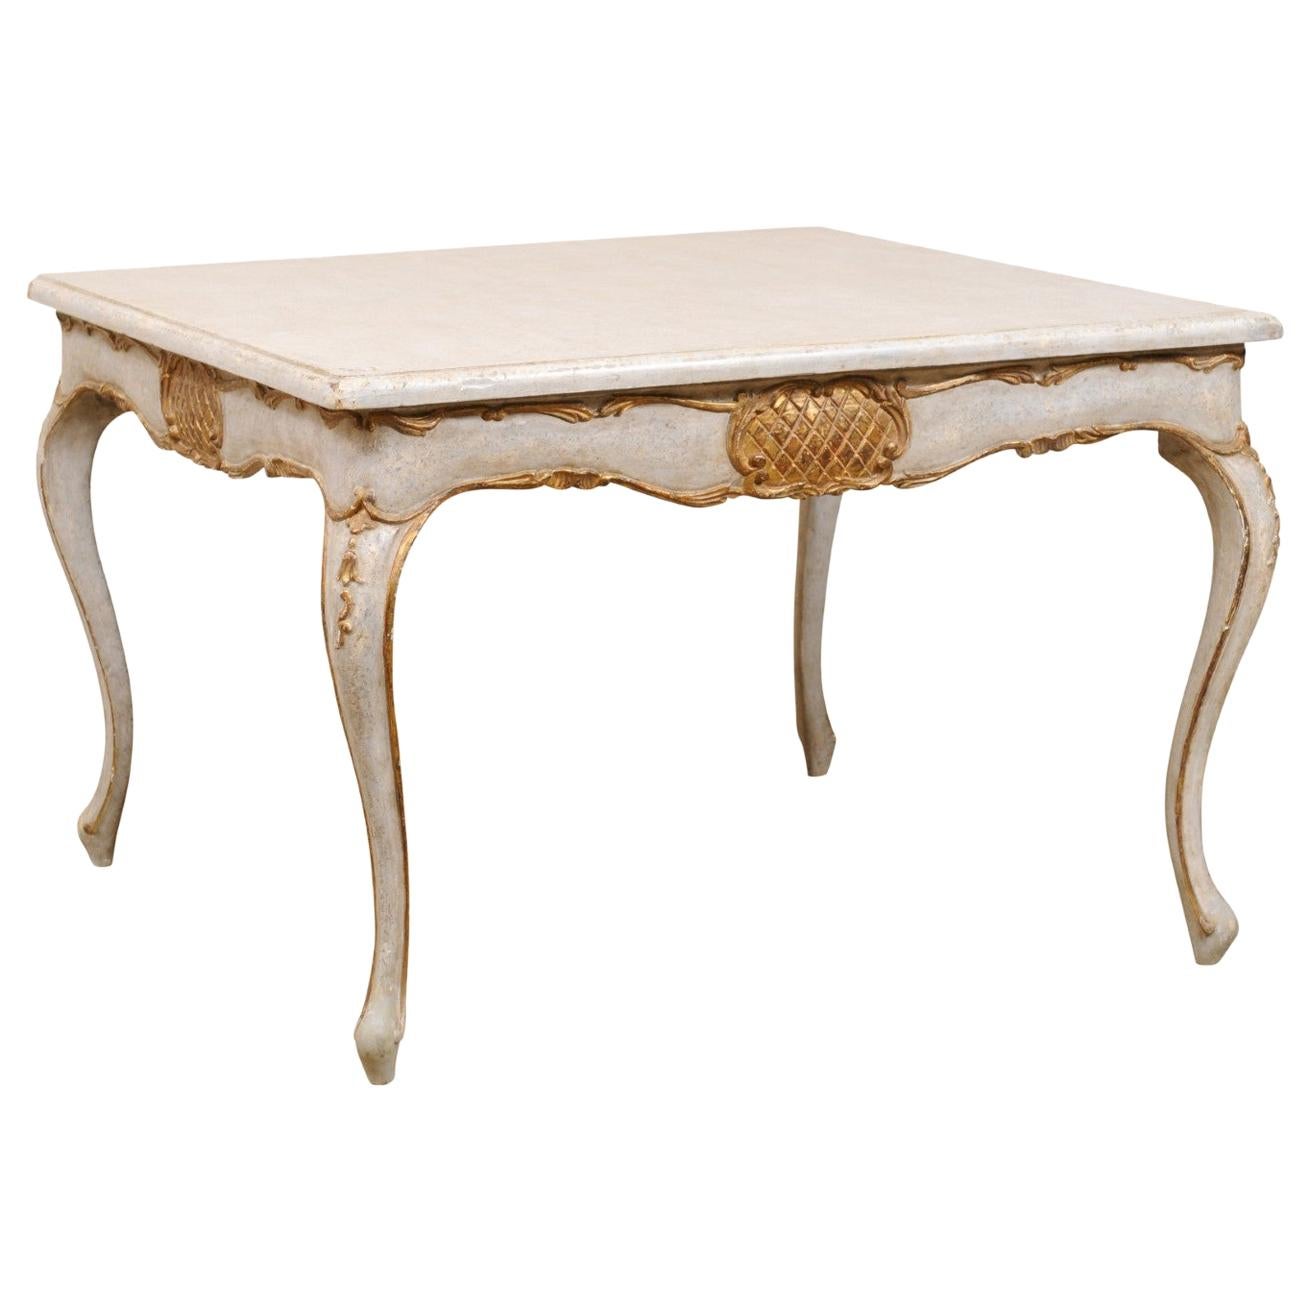 Italian Square-Shaped Wood Table w/ Elegant Legs, Scalloped Skirt & Gilt Accents For Sale